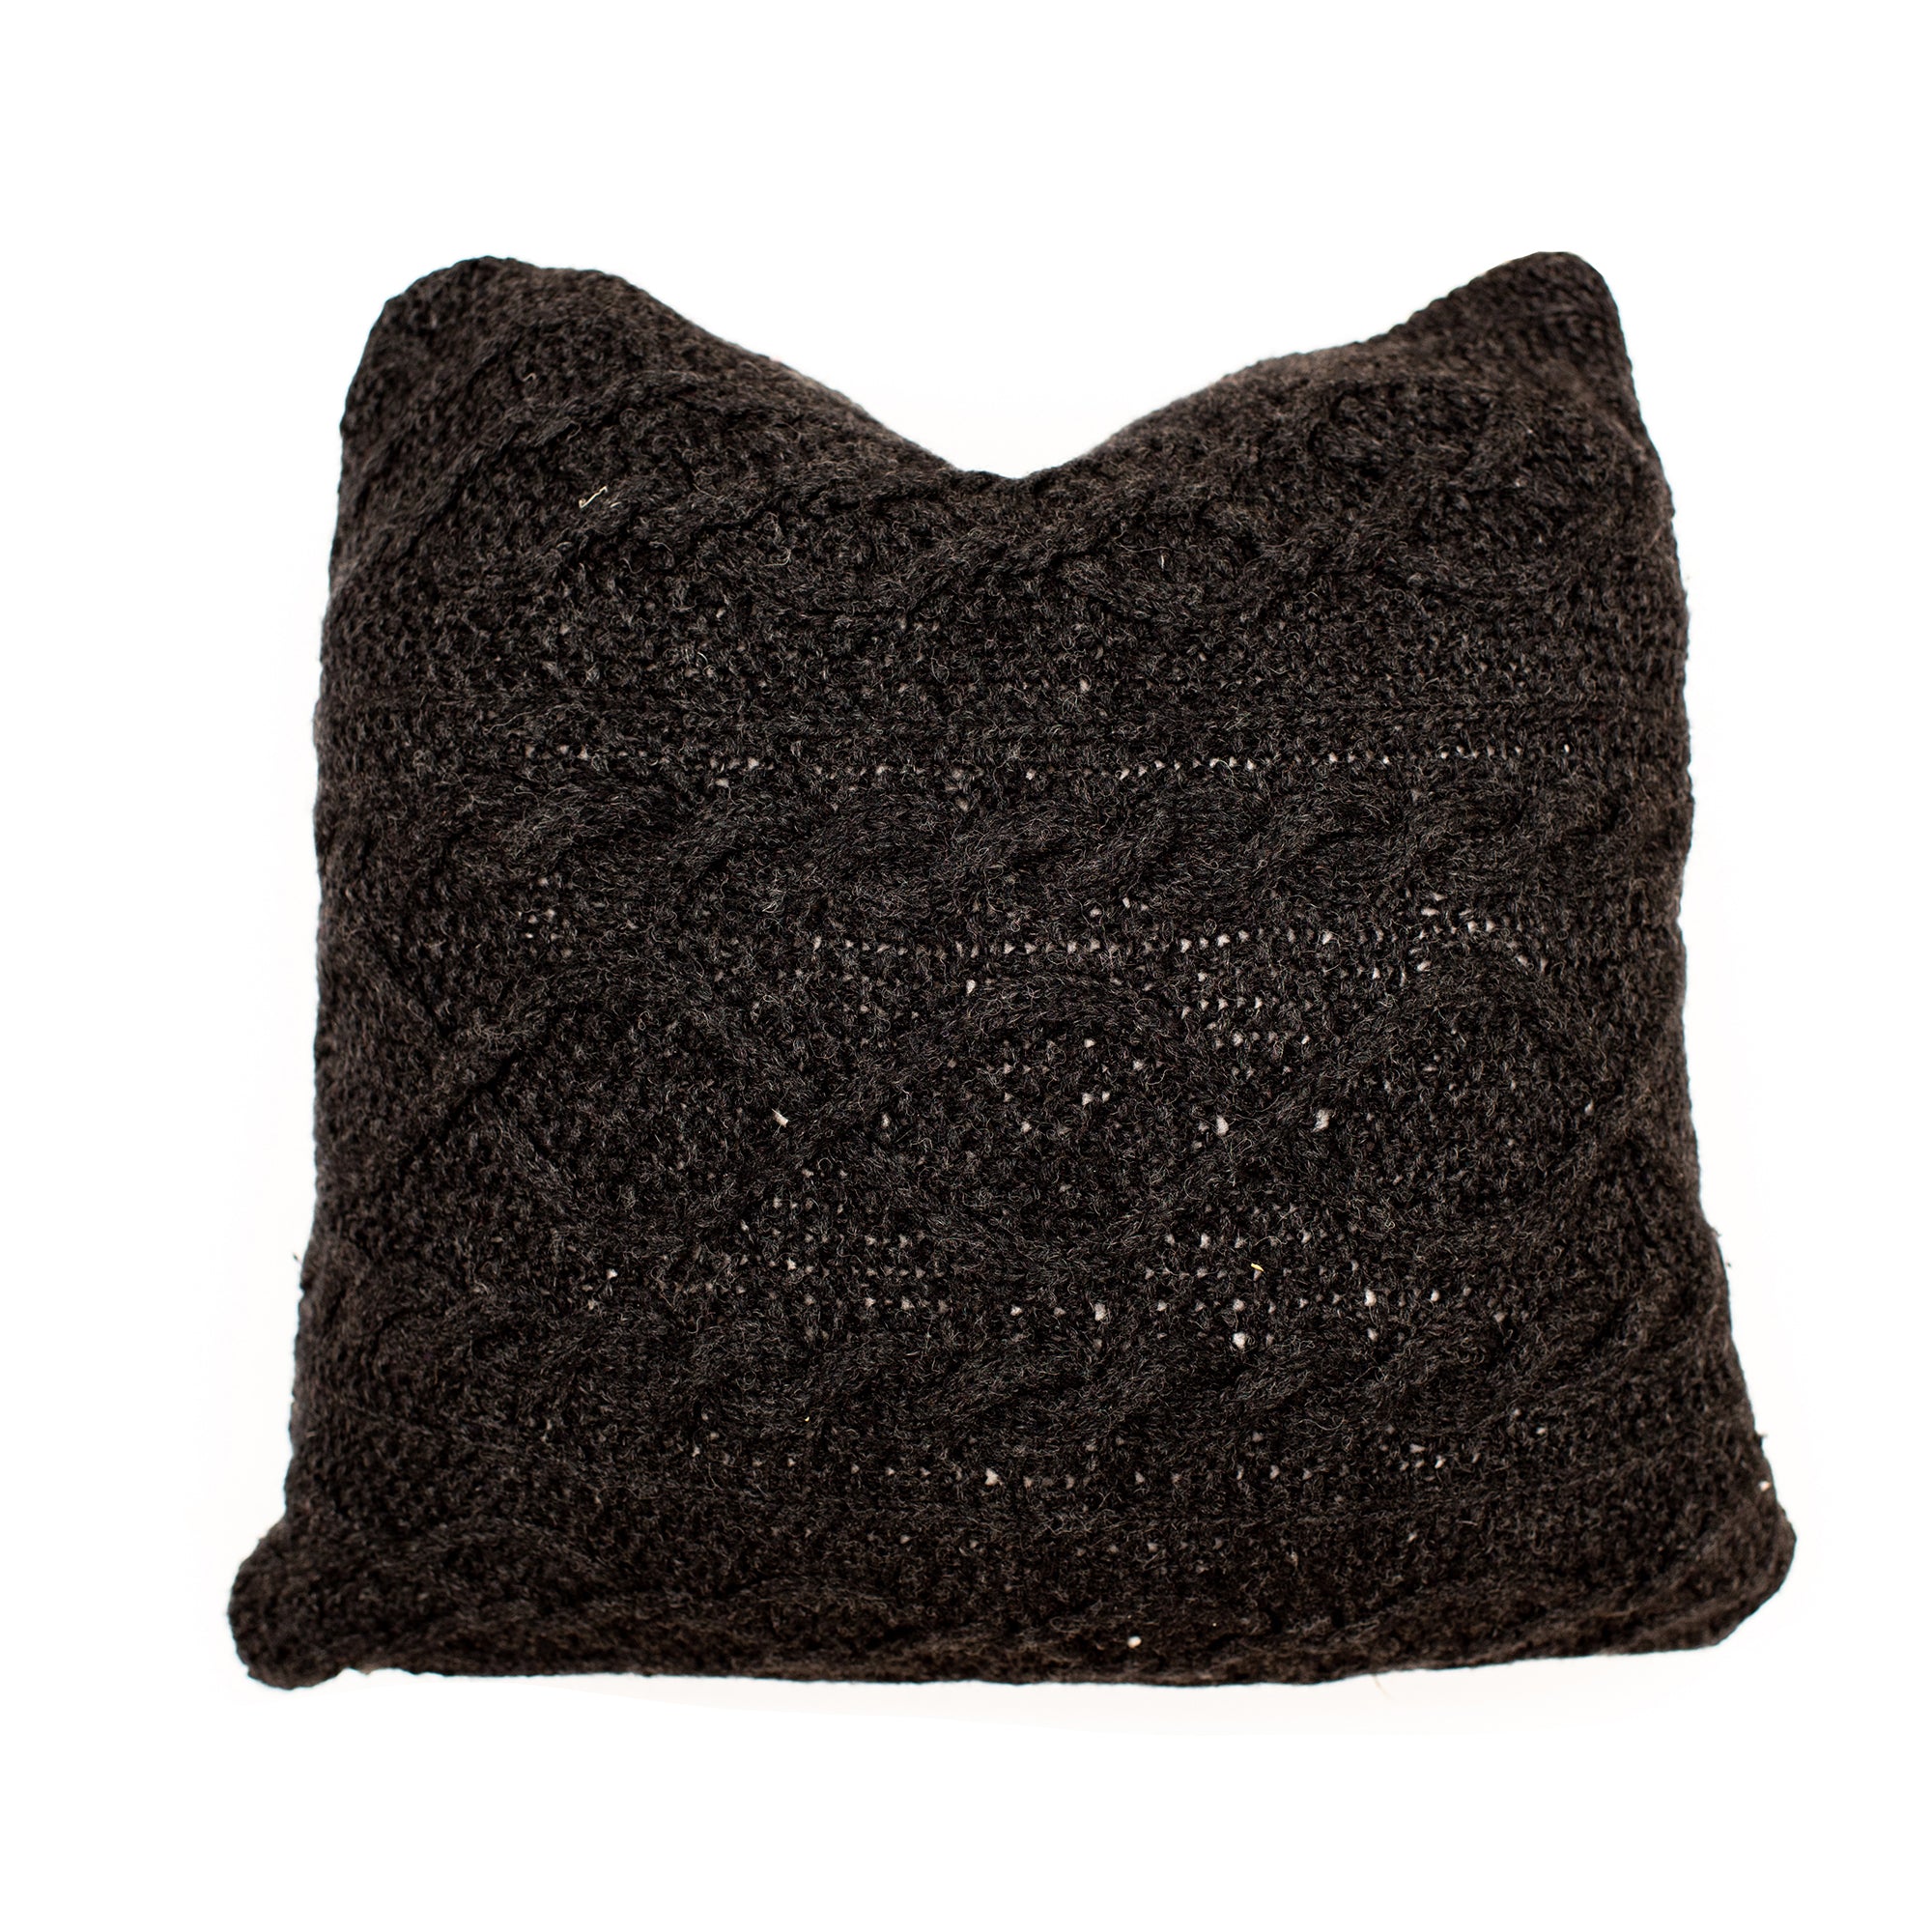 18x18 Black Cable Knit Pillow cover